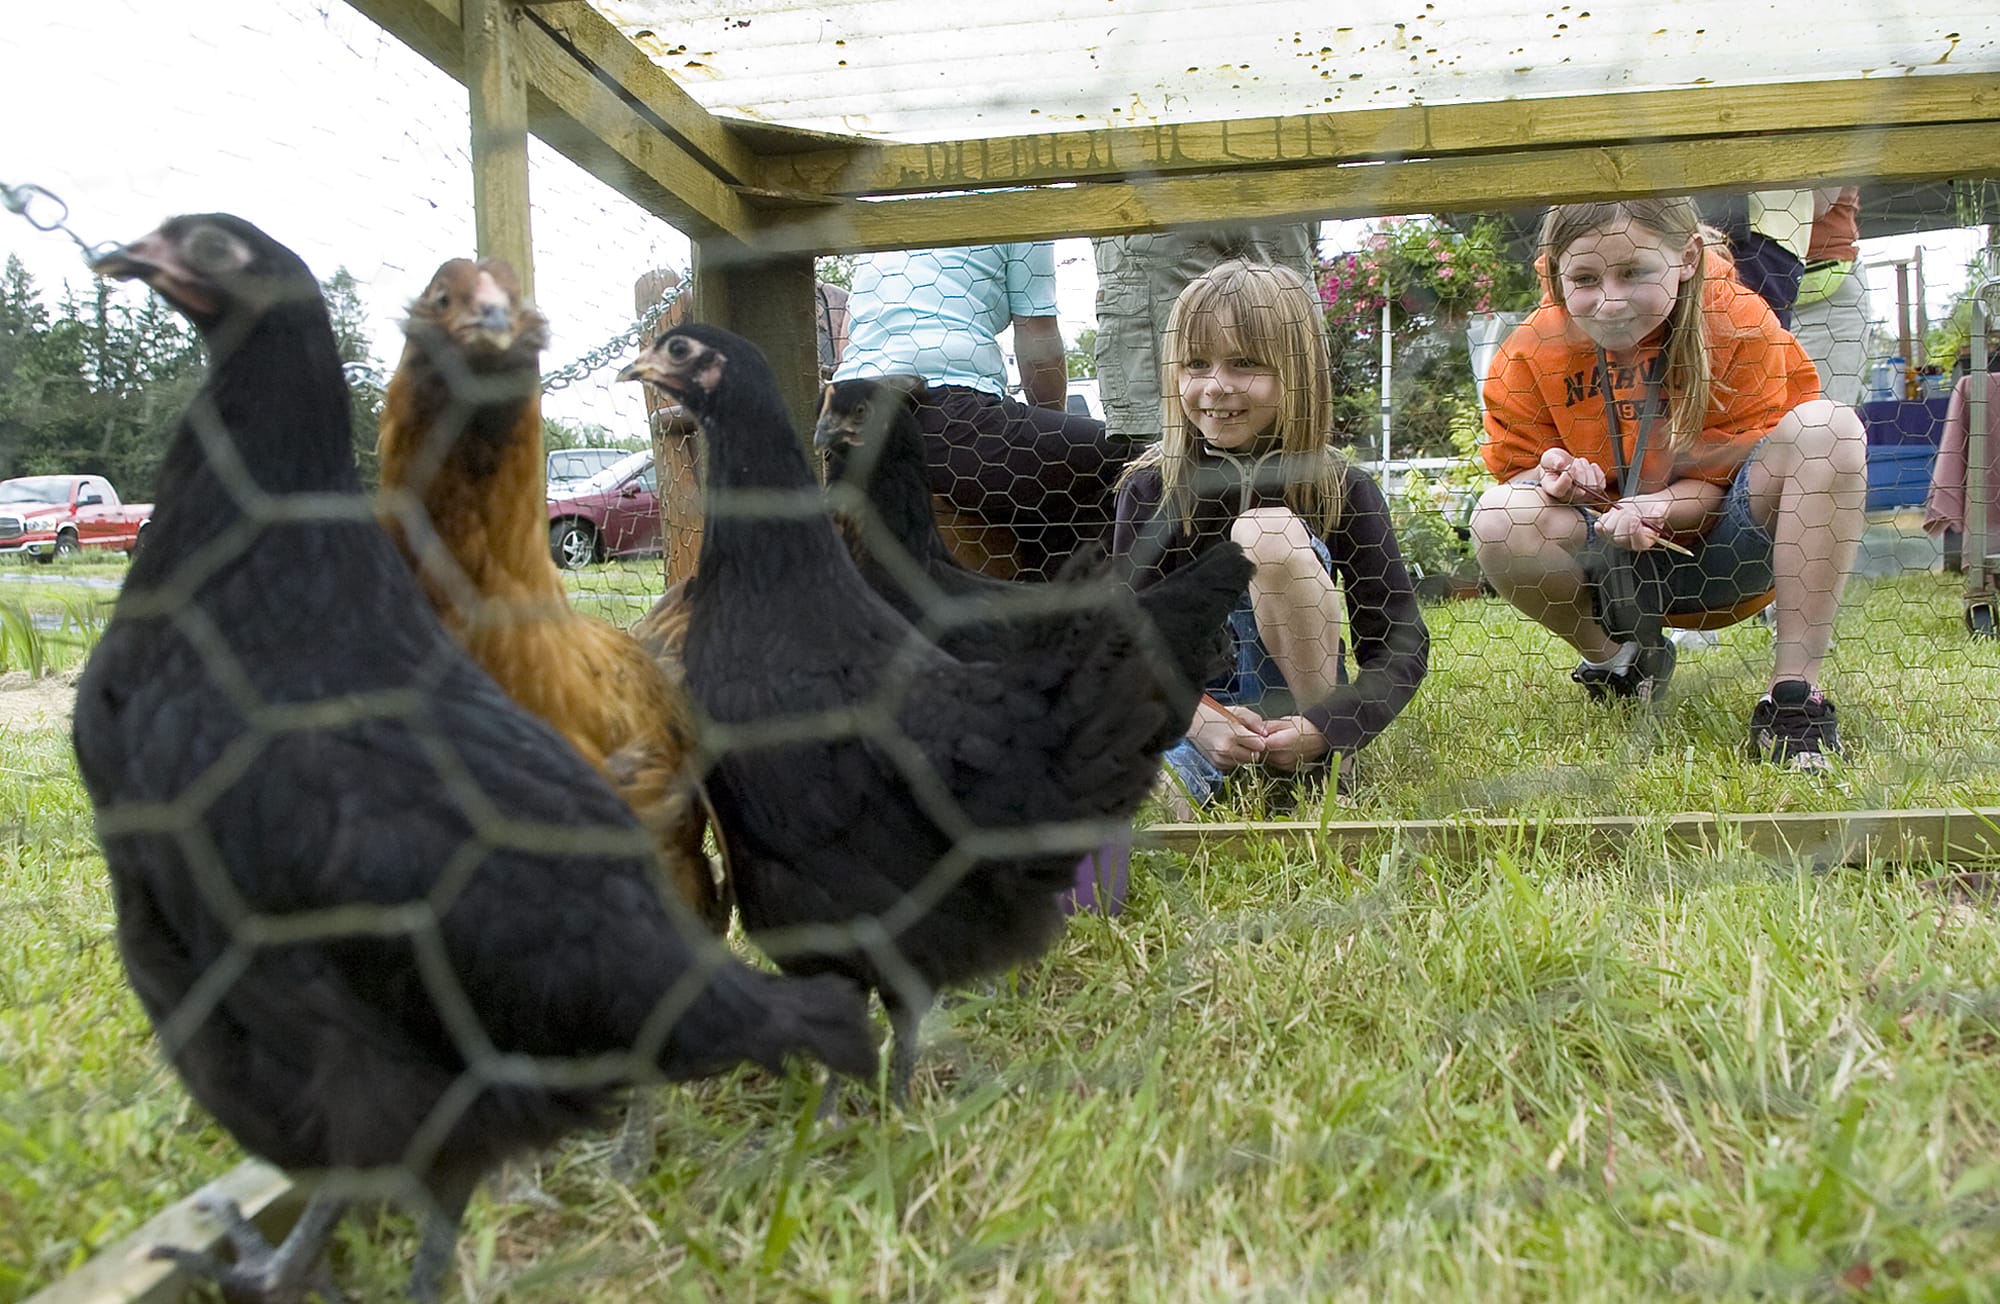 Ciah Koehler 7, and her sister Chloe Koehler 10, stop to look at chickens during a tour of Half Moon Farm, Saturday, June 21, 2008.  Half Moon Farm, along with Garden Delights and  Scented Acres were open for visitors as part of the Summer Solstice in the County farm tour.